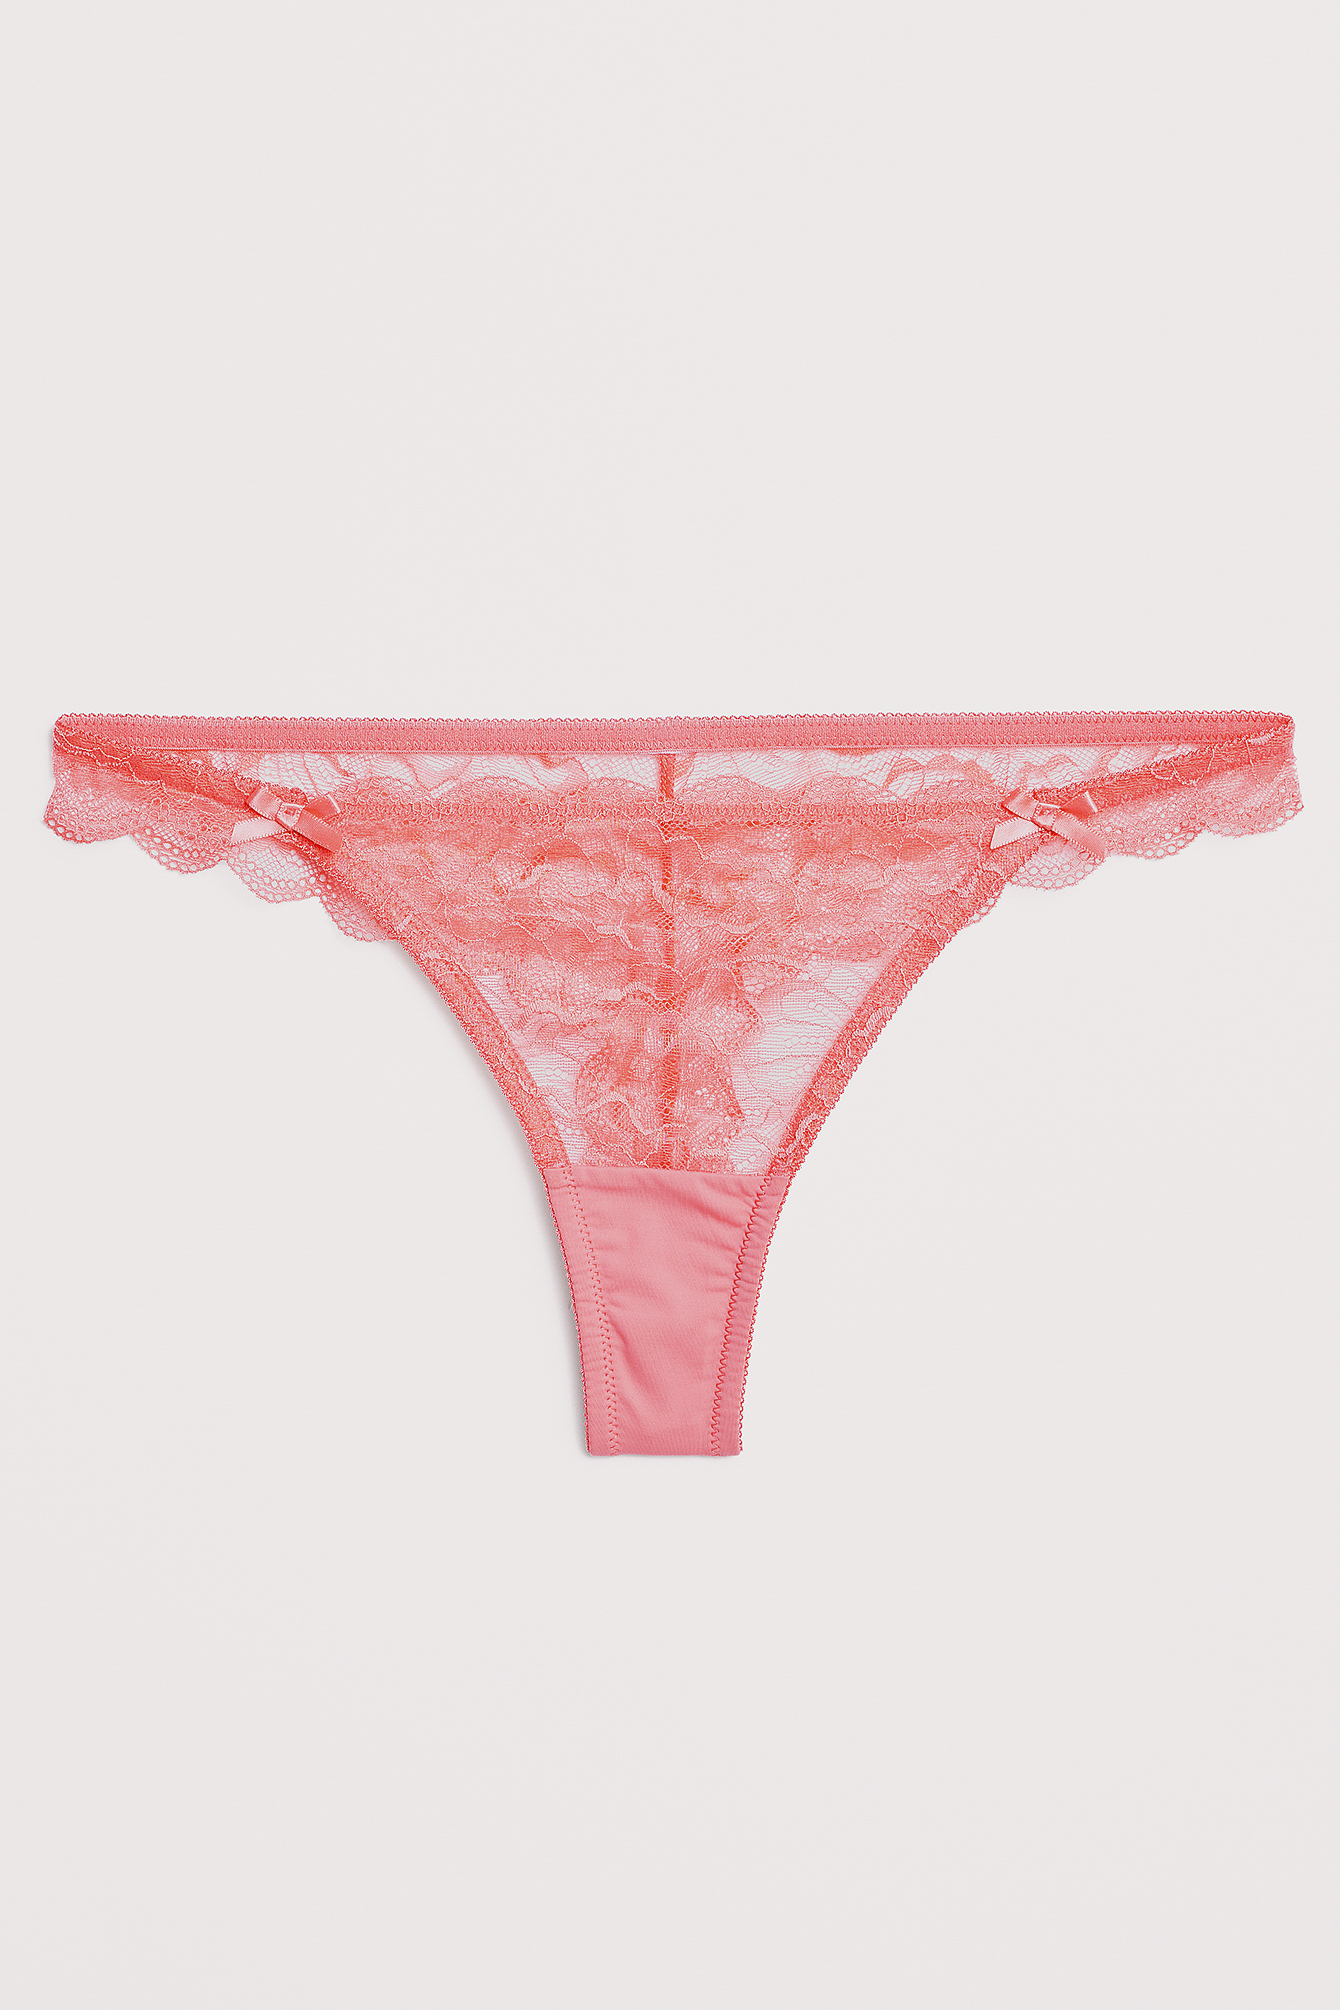 Tom Thong Panty Crystal Pink 0620820 - Lace & Day